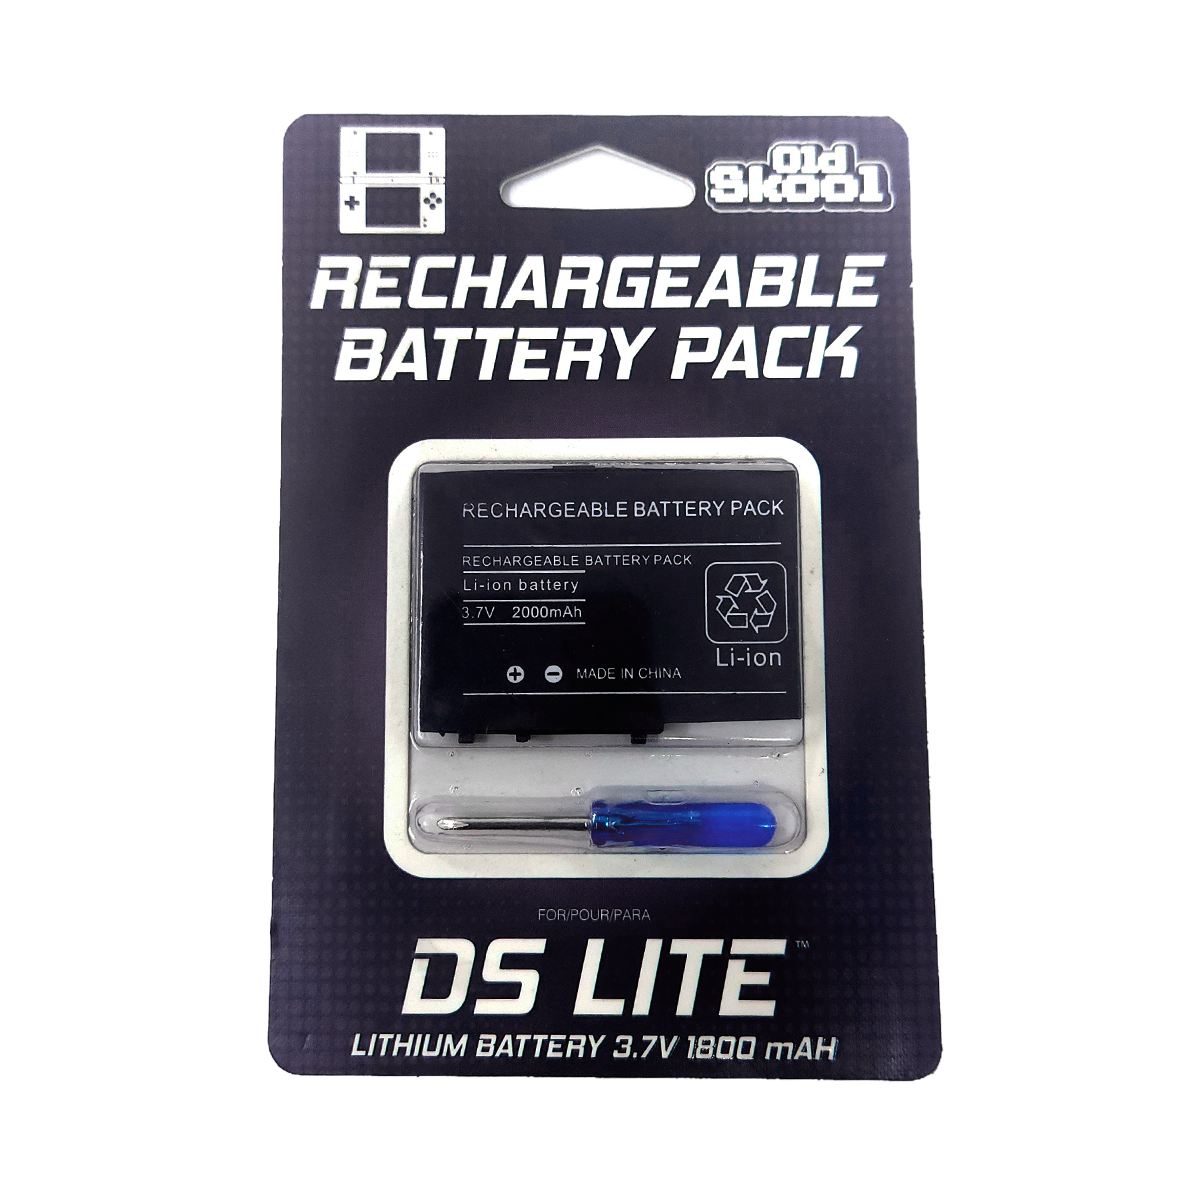 Nintendo DS LITE Battery Pack Replacement - Rechargeable (Nintendo DS)